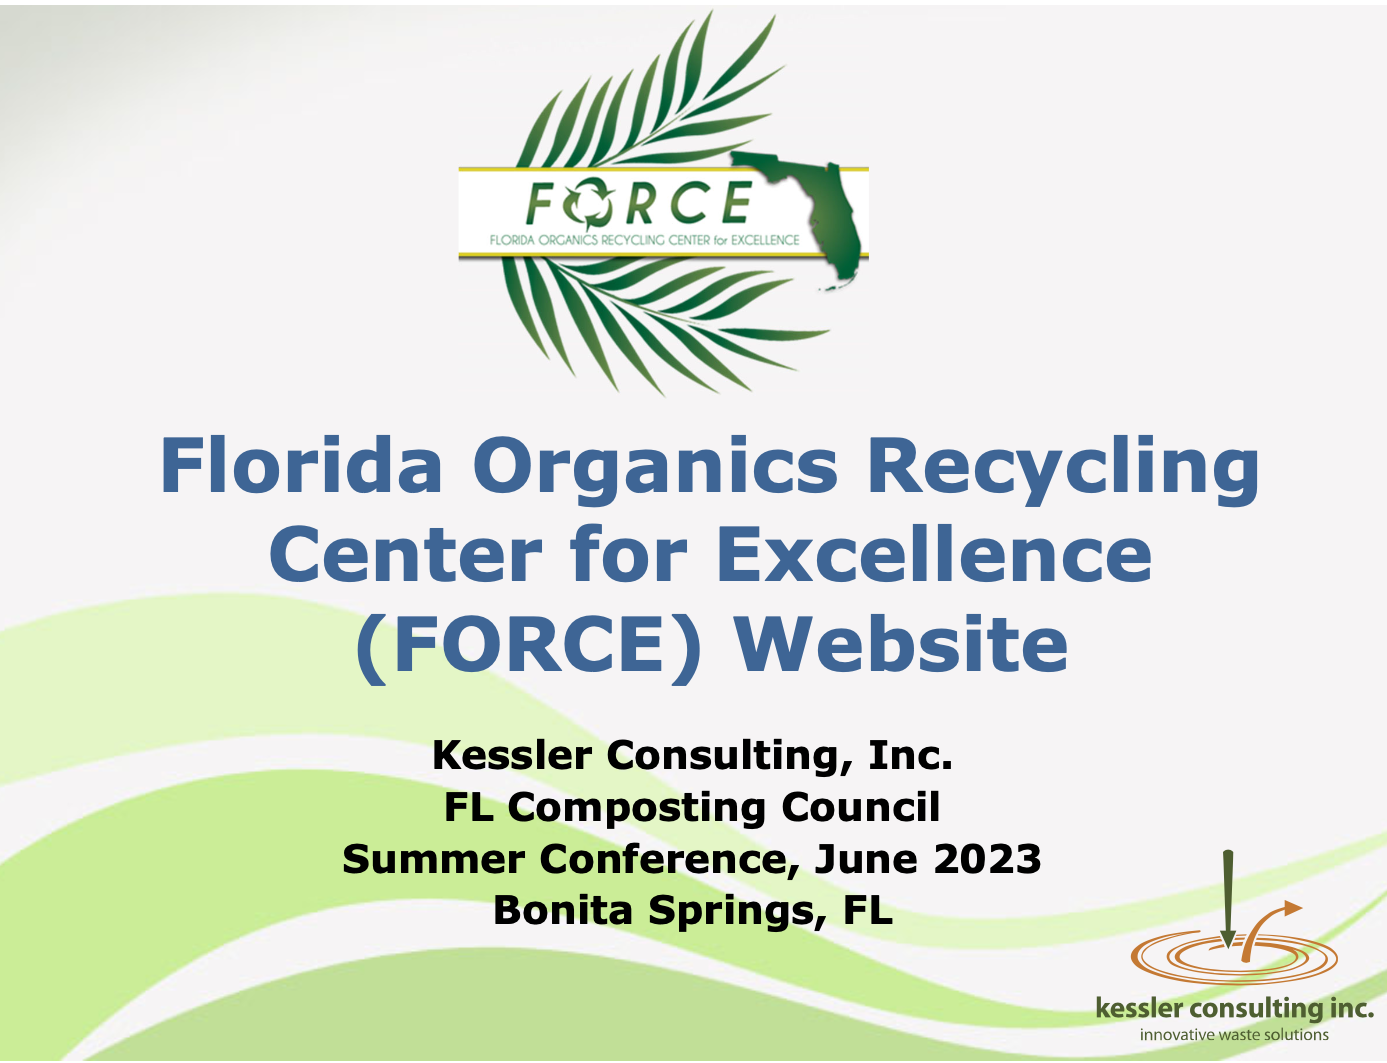 FORCE - FL COMPOSTING COUNCIL SUMMER CONFERENCE